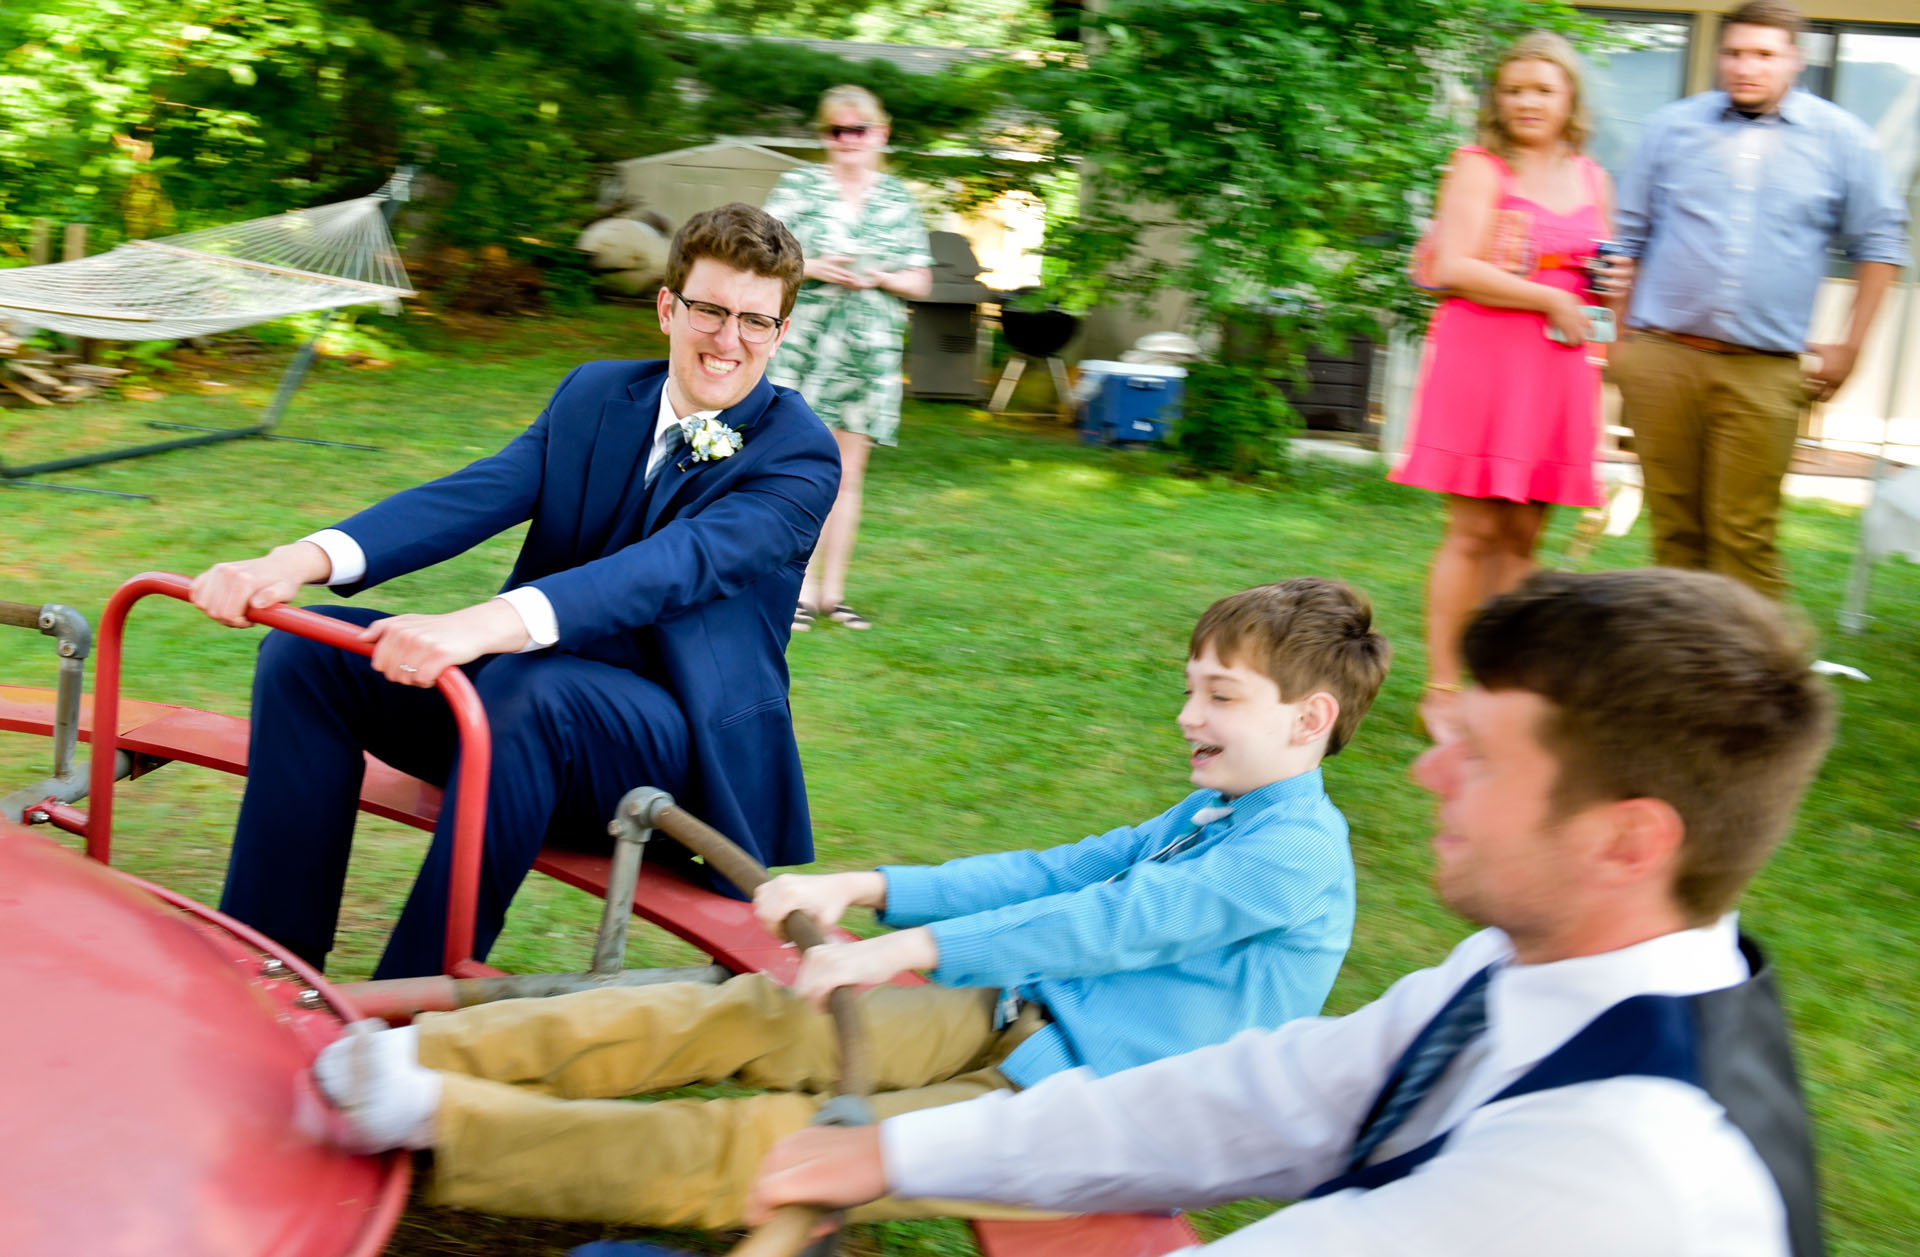 A groom in Brighton, Michigan jumps on a piece of playground equipment for this hilarious and playful wedding photo.